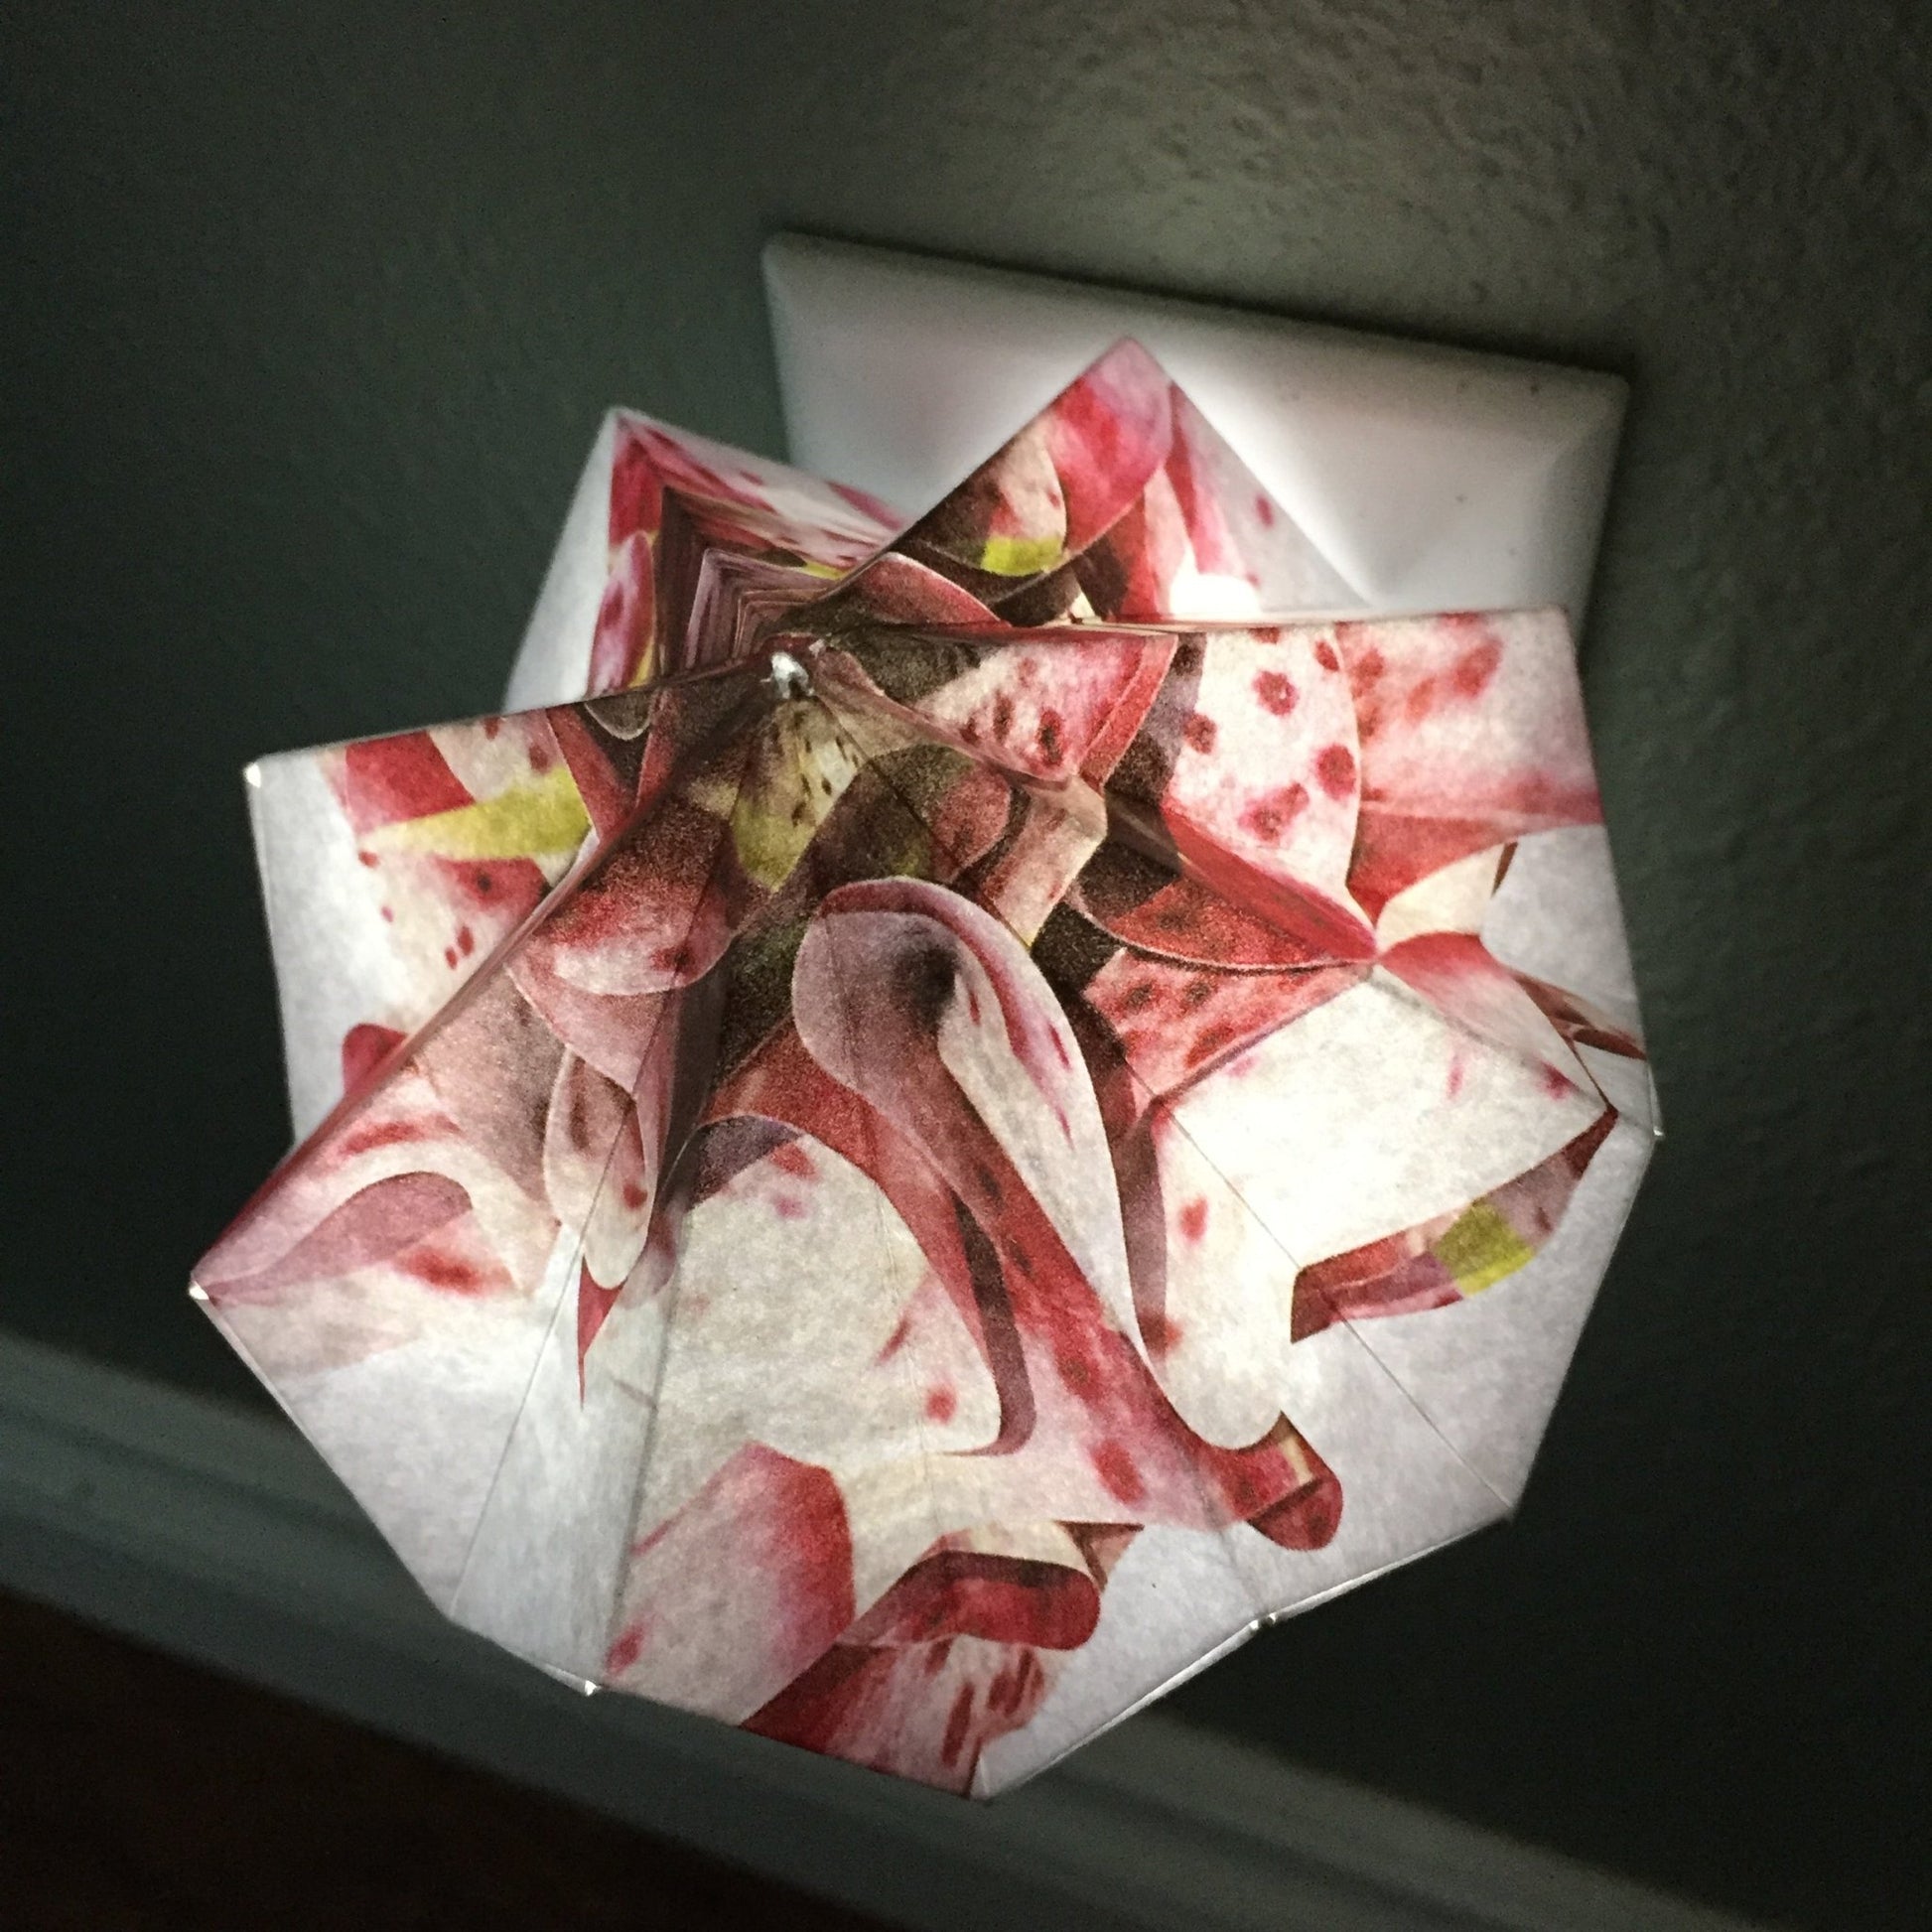 Origami Night Light: No Time To Look At A Flower By Artist Lisa Marie Sipe in collaboration with LeeMo Designs in Bend, Oregon